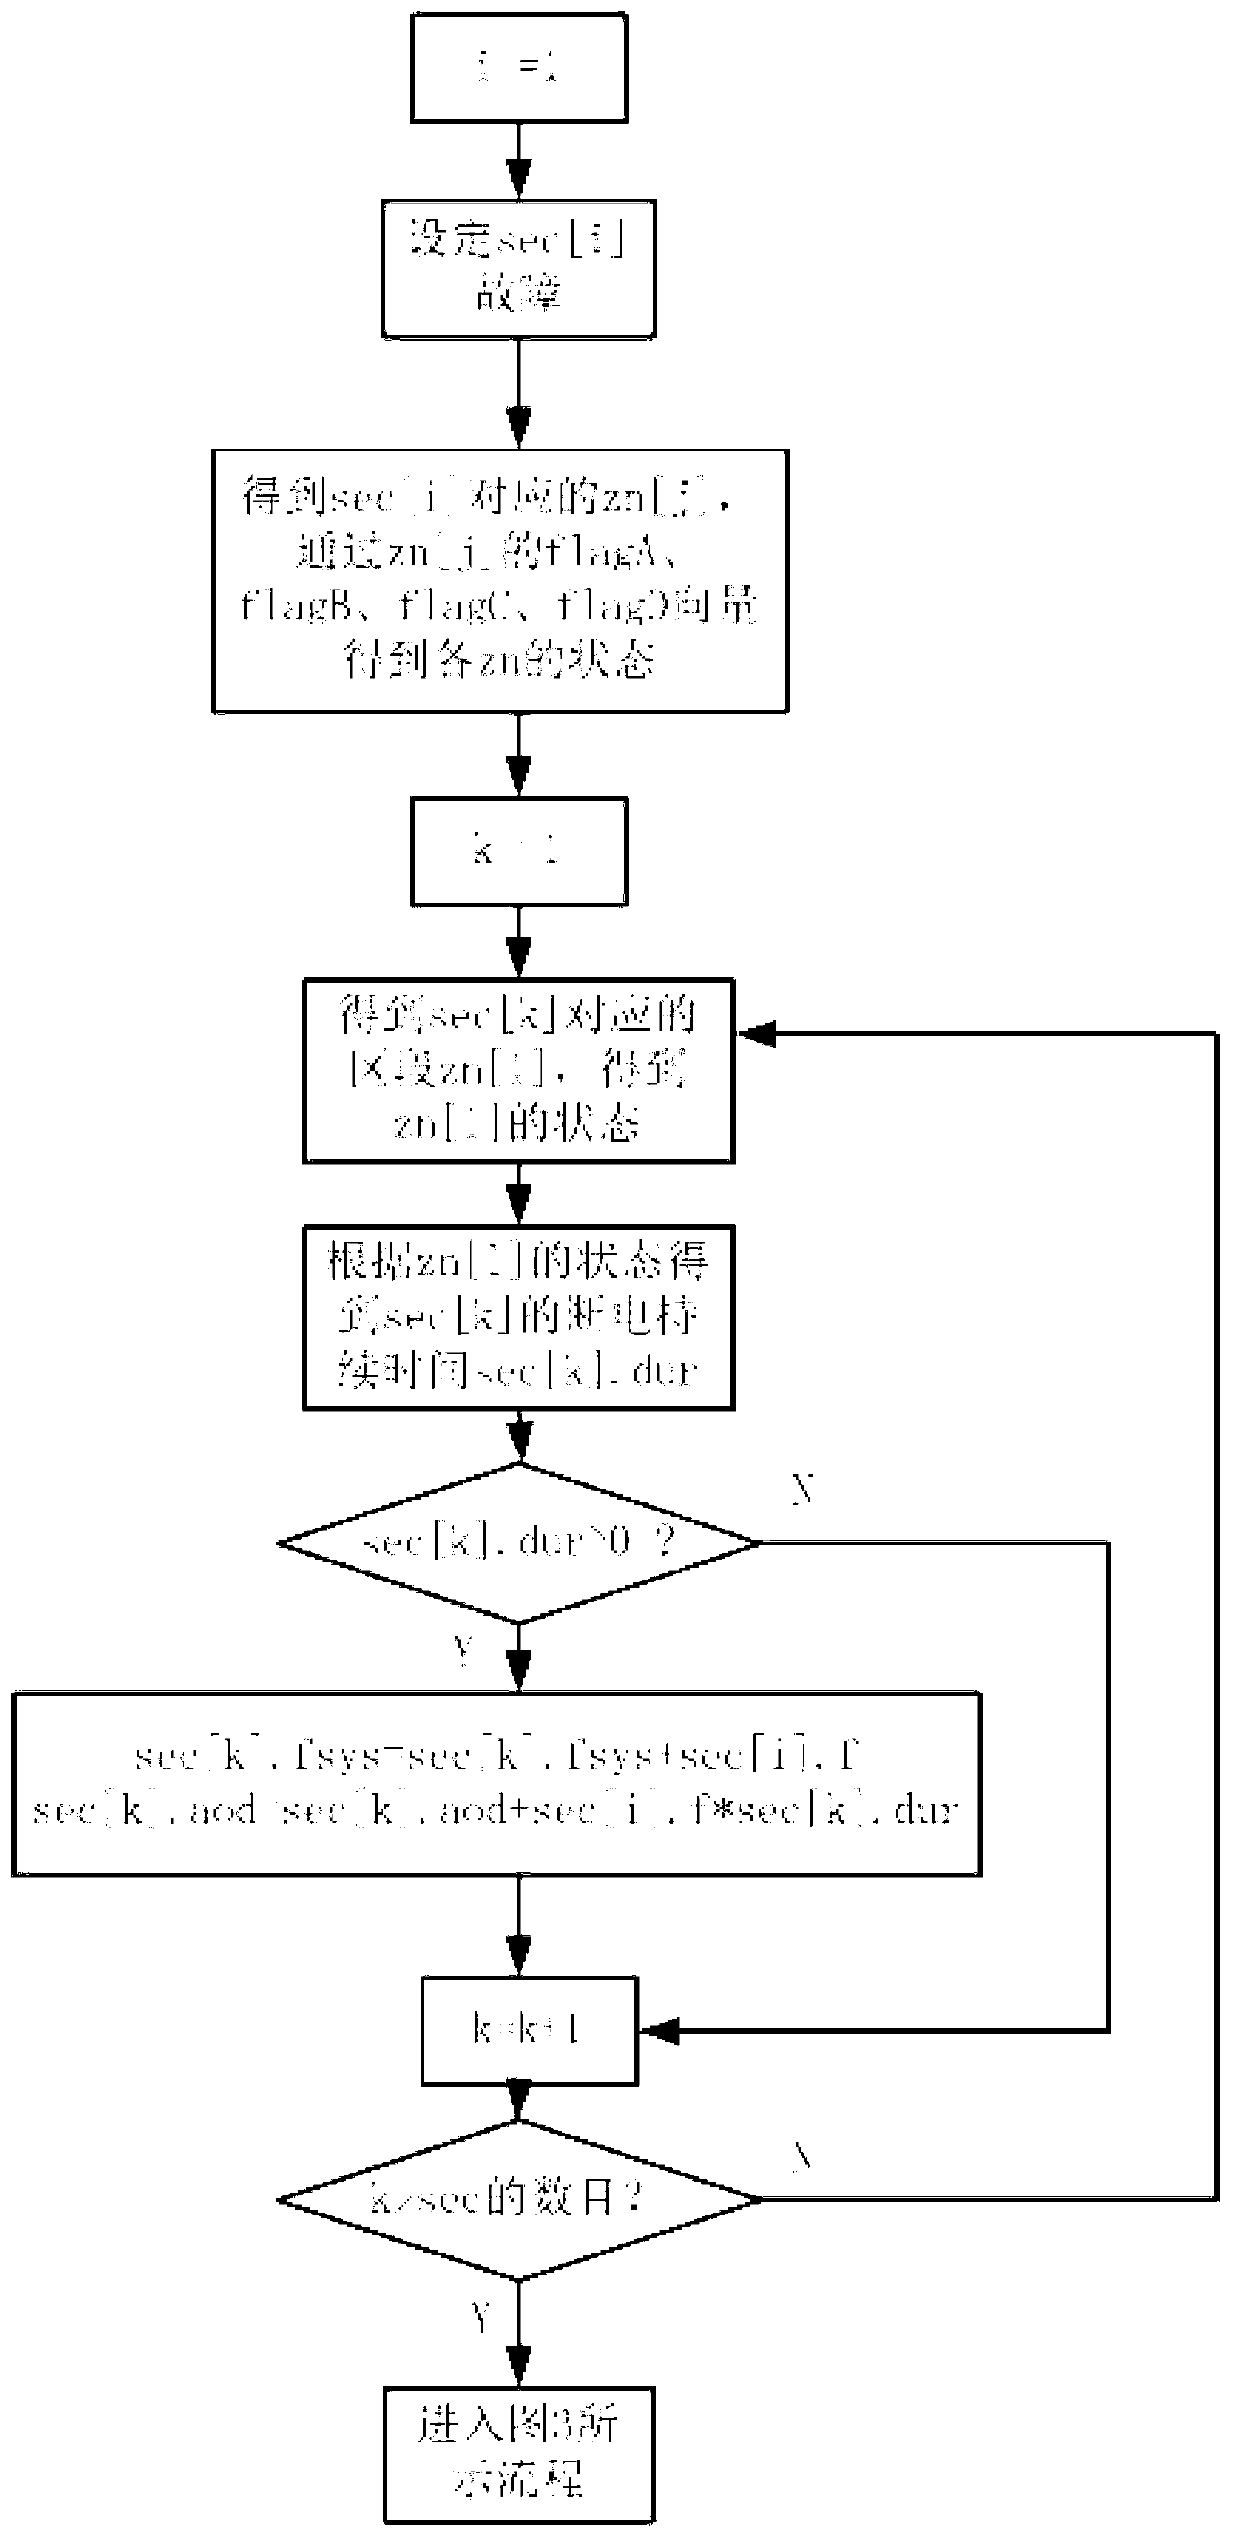 Power distribution network reliability assessment state labeling method based on segments